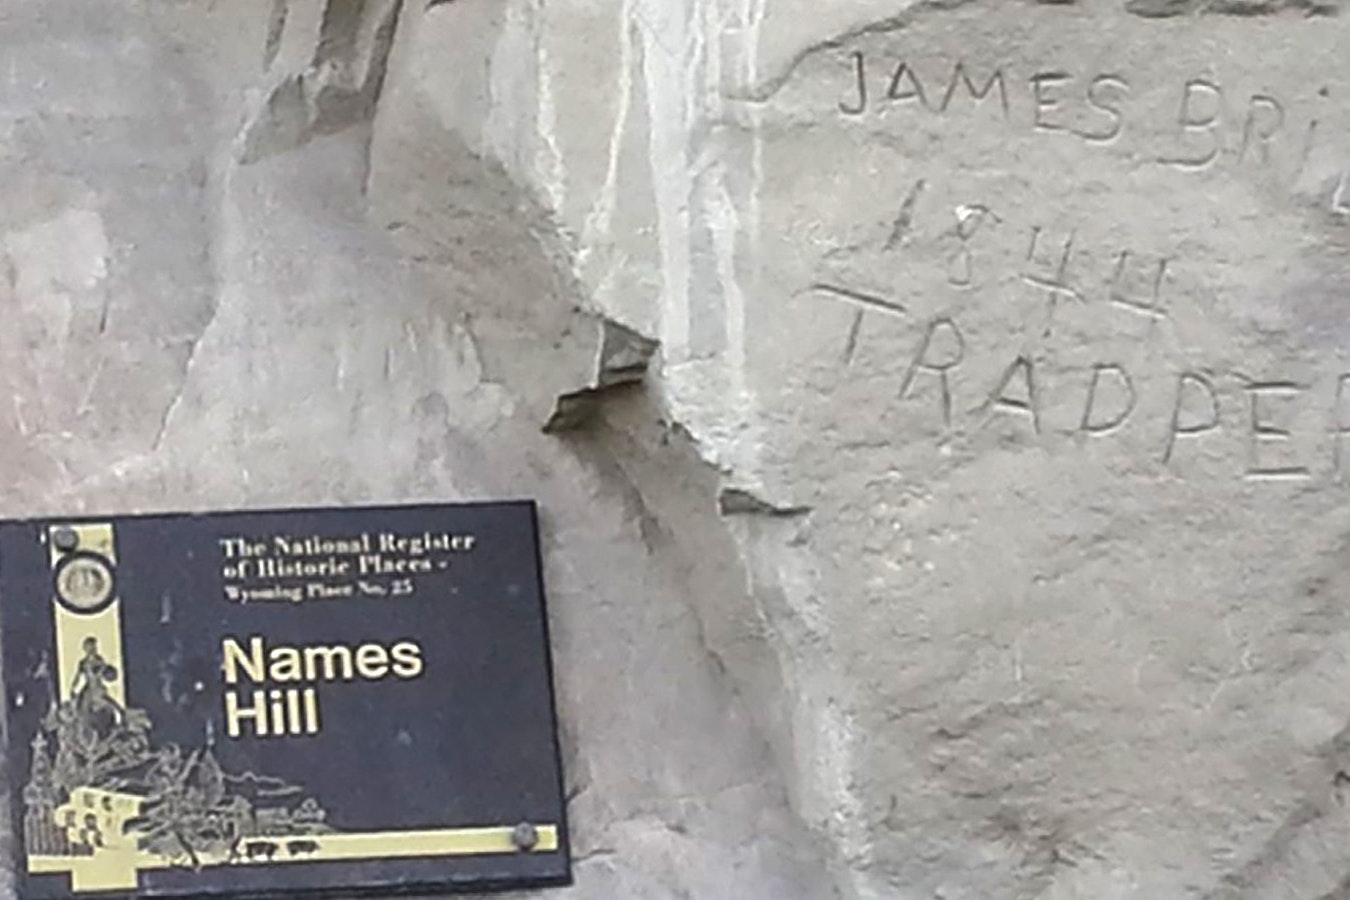 “James Bridger, Trapper, 1844” is one of the most prominent rock inscriptions at Names Hill in Lincoln County. Other names found there date back to trappers in the 1820s.